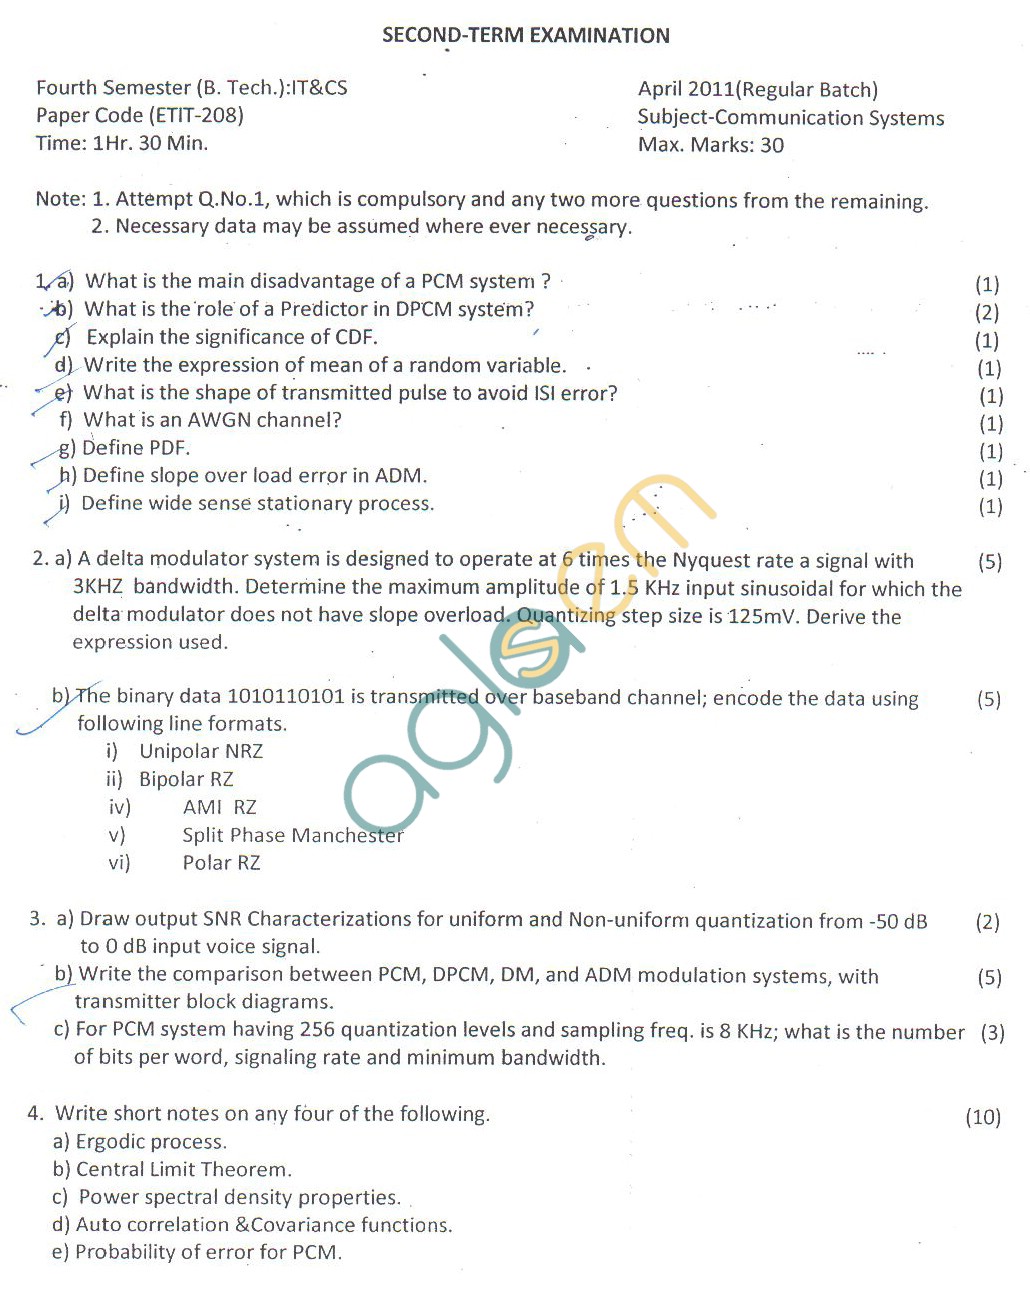 GGSIPU Question Papers Fourth Semester – Second Term 2011 – ETIT-208